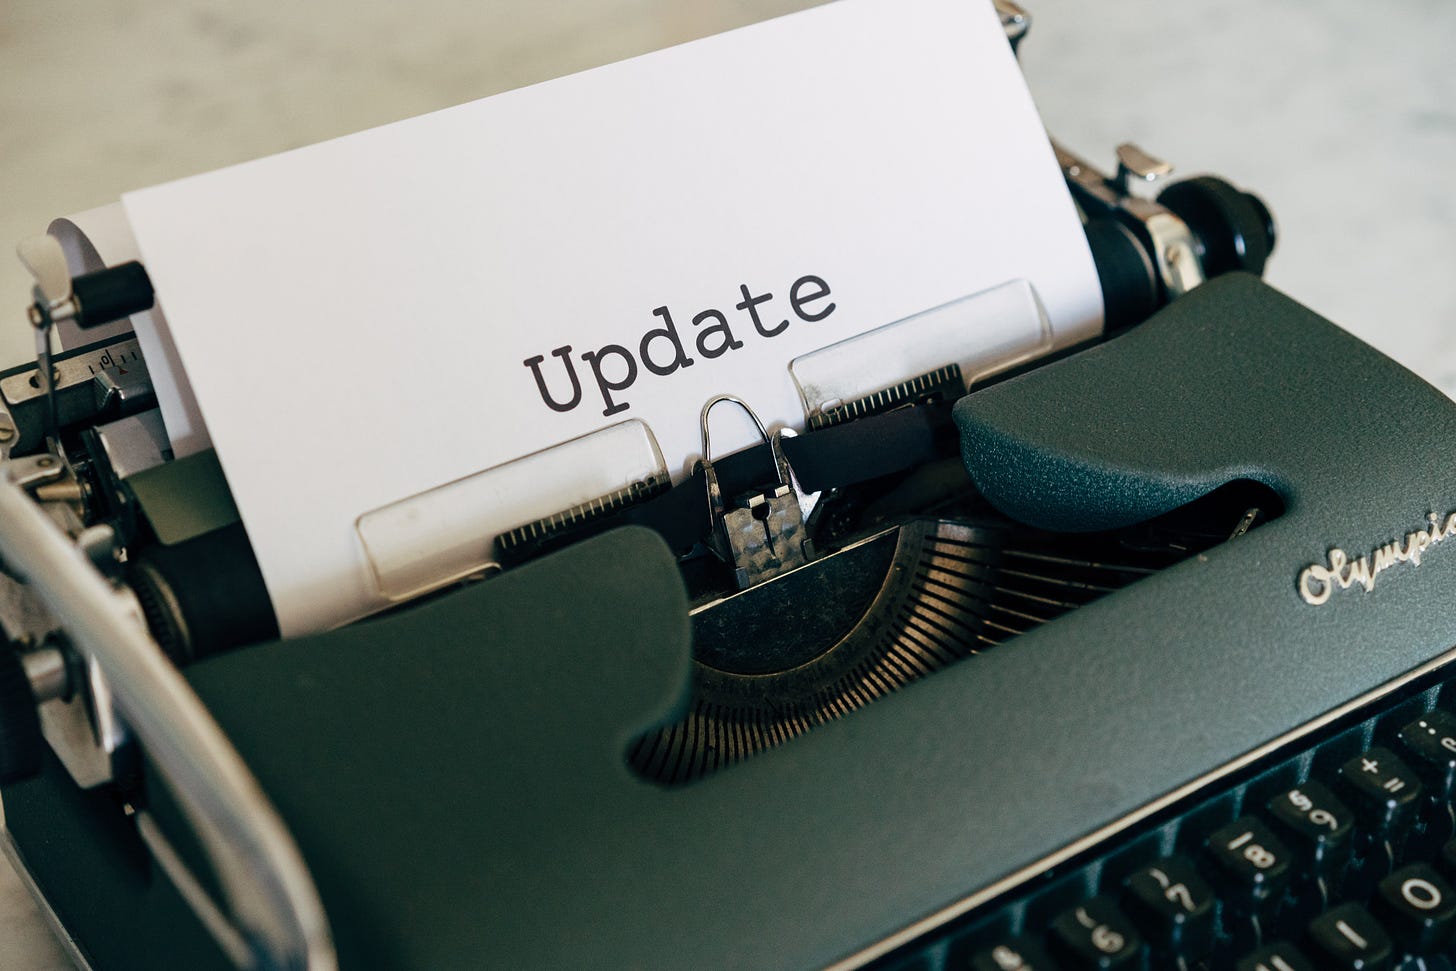 Picture of a typewriter with the word "Update" on a piece of paper